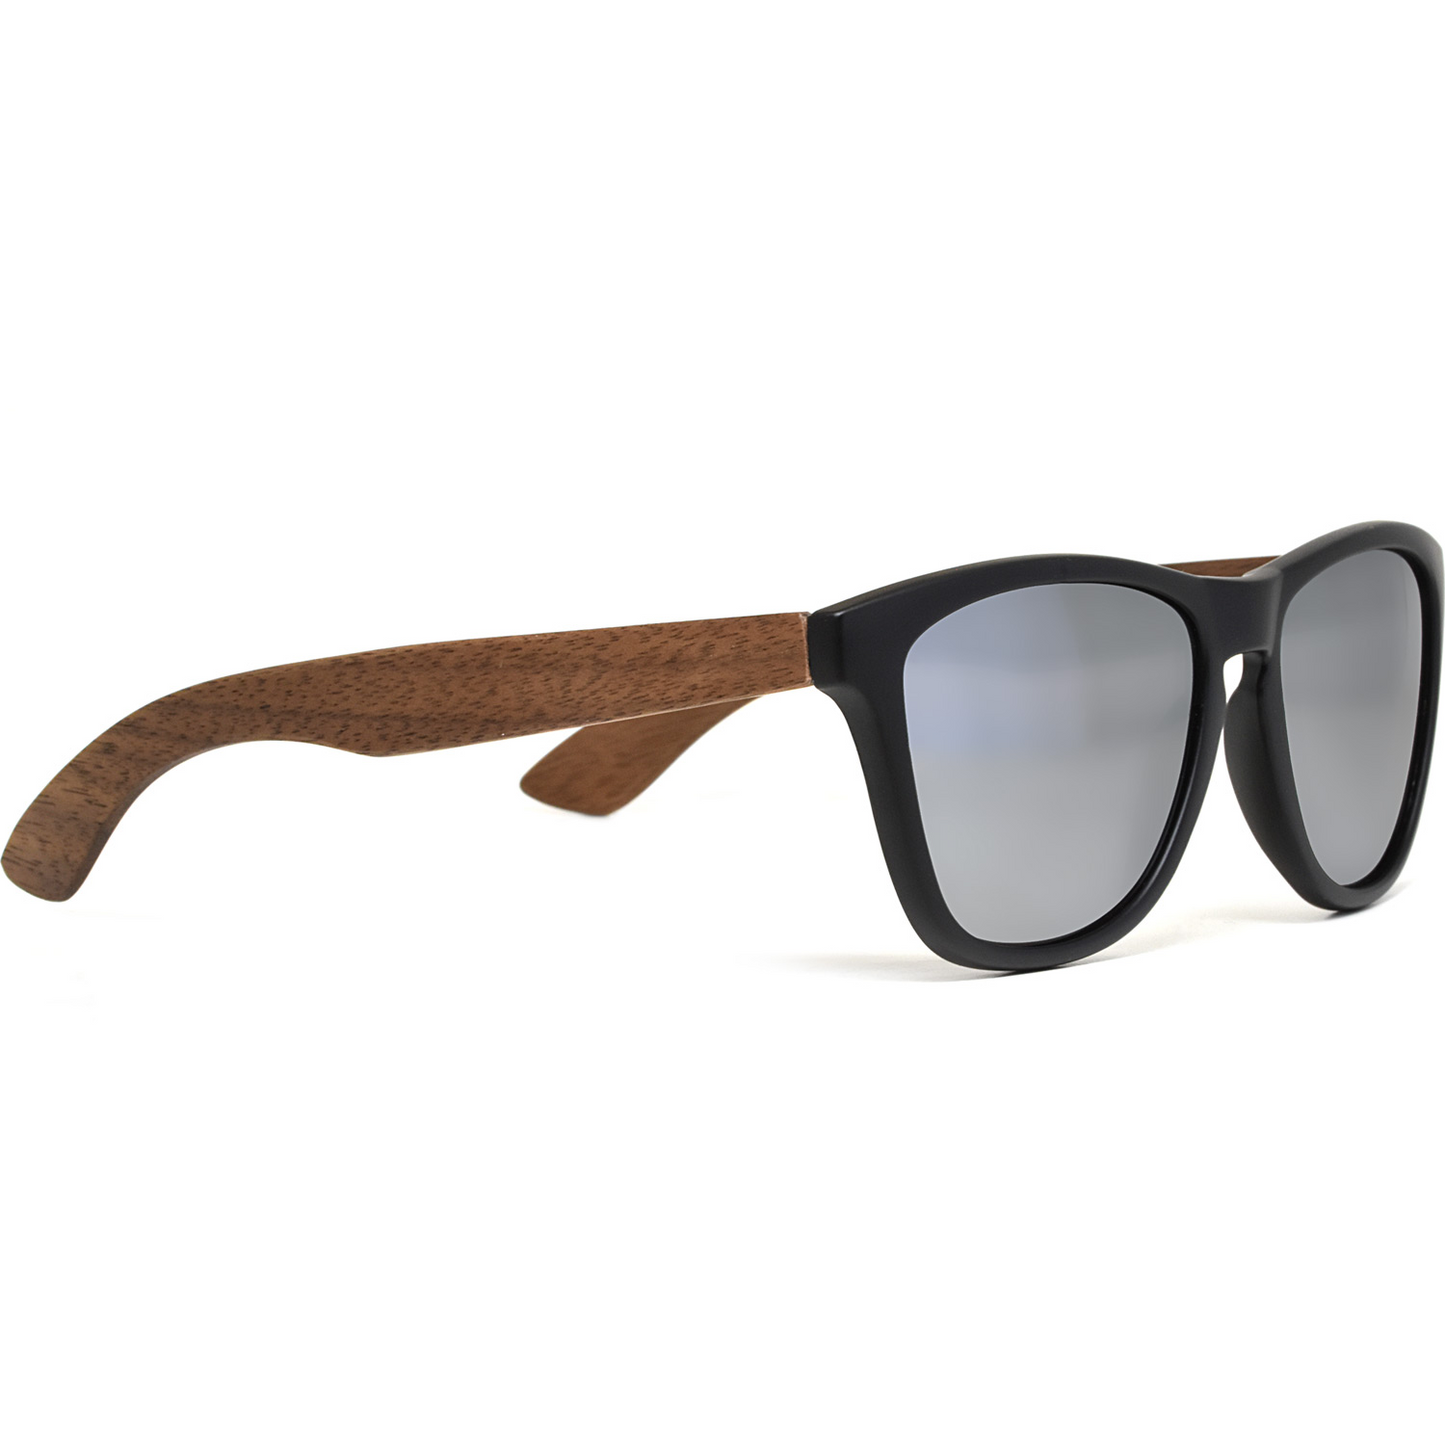 Classic walnut wood sunglasses with silver mirrored polarized lenses